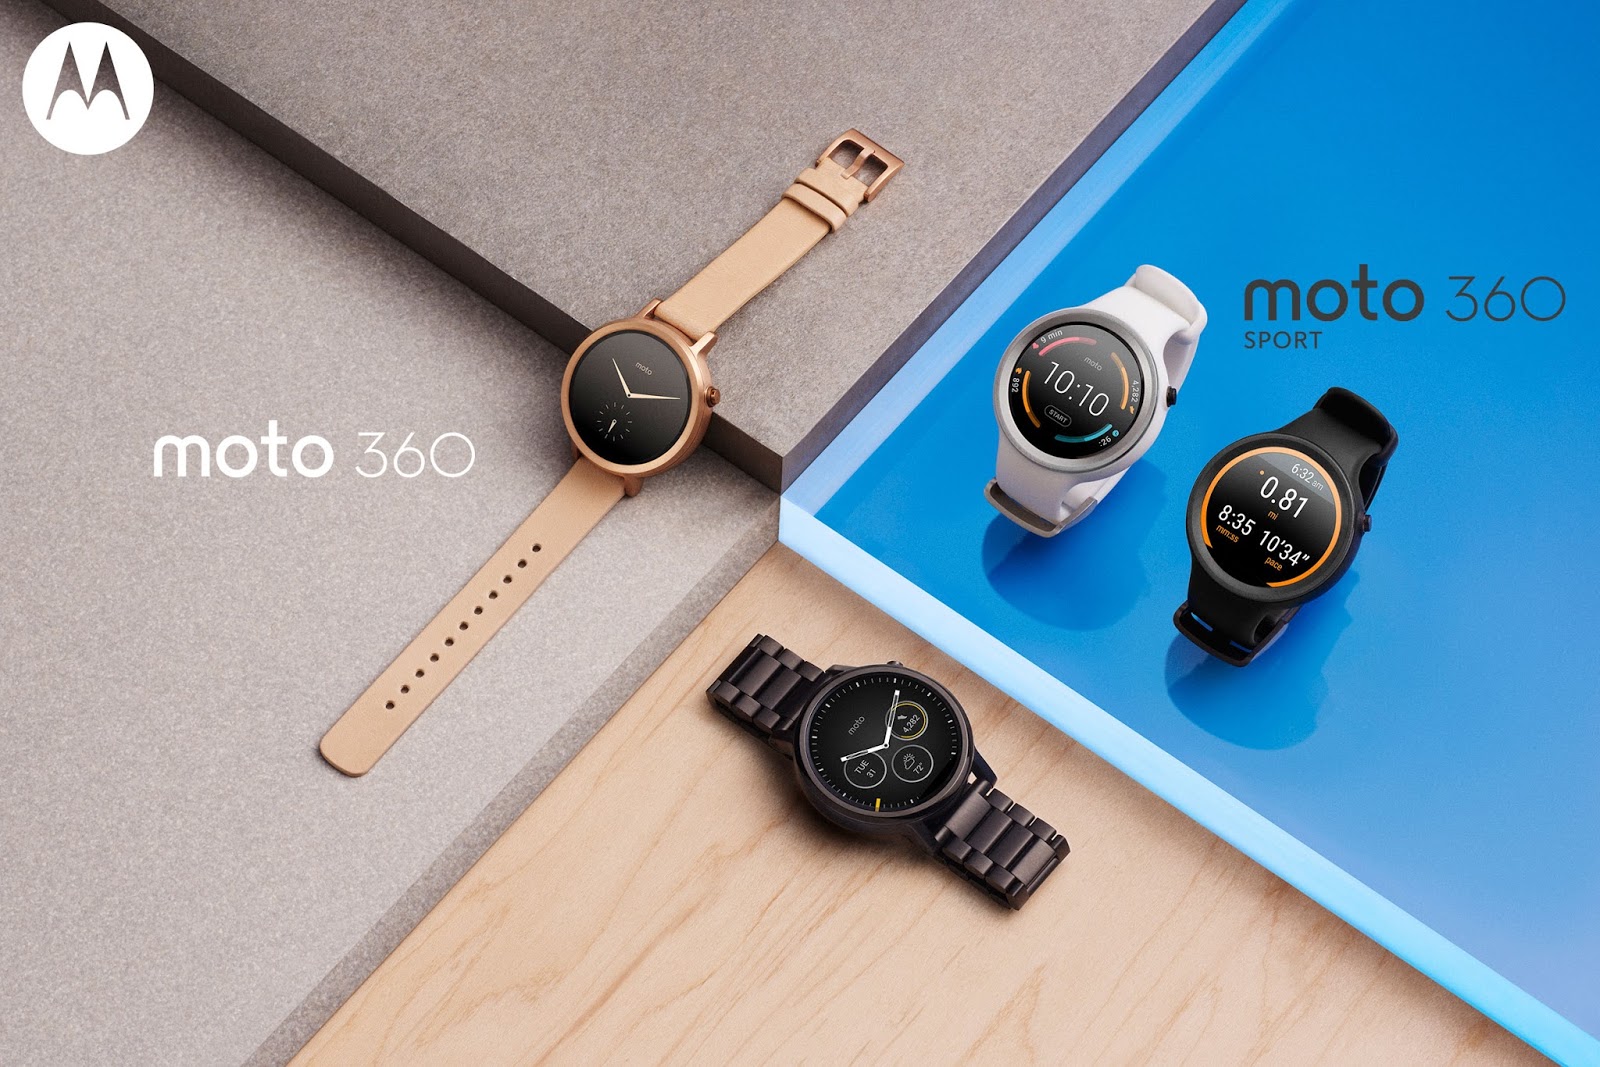 The New Moto 360 Collection: Giving you more choice with the watch that makes time for you